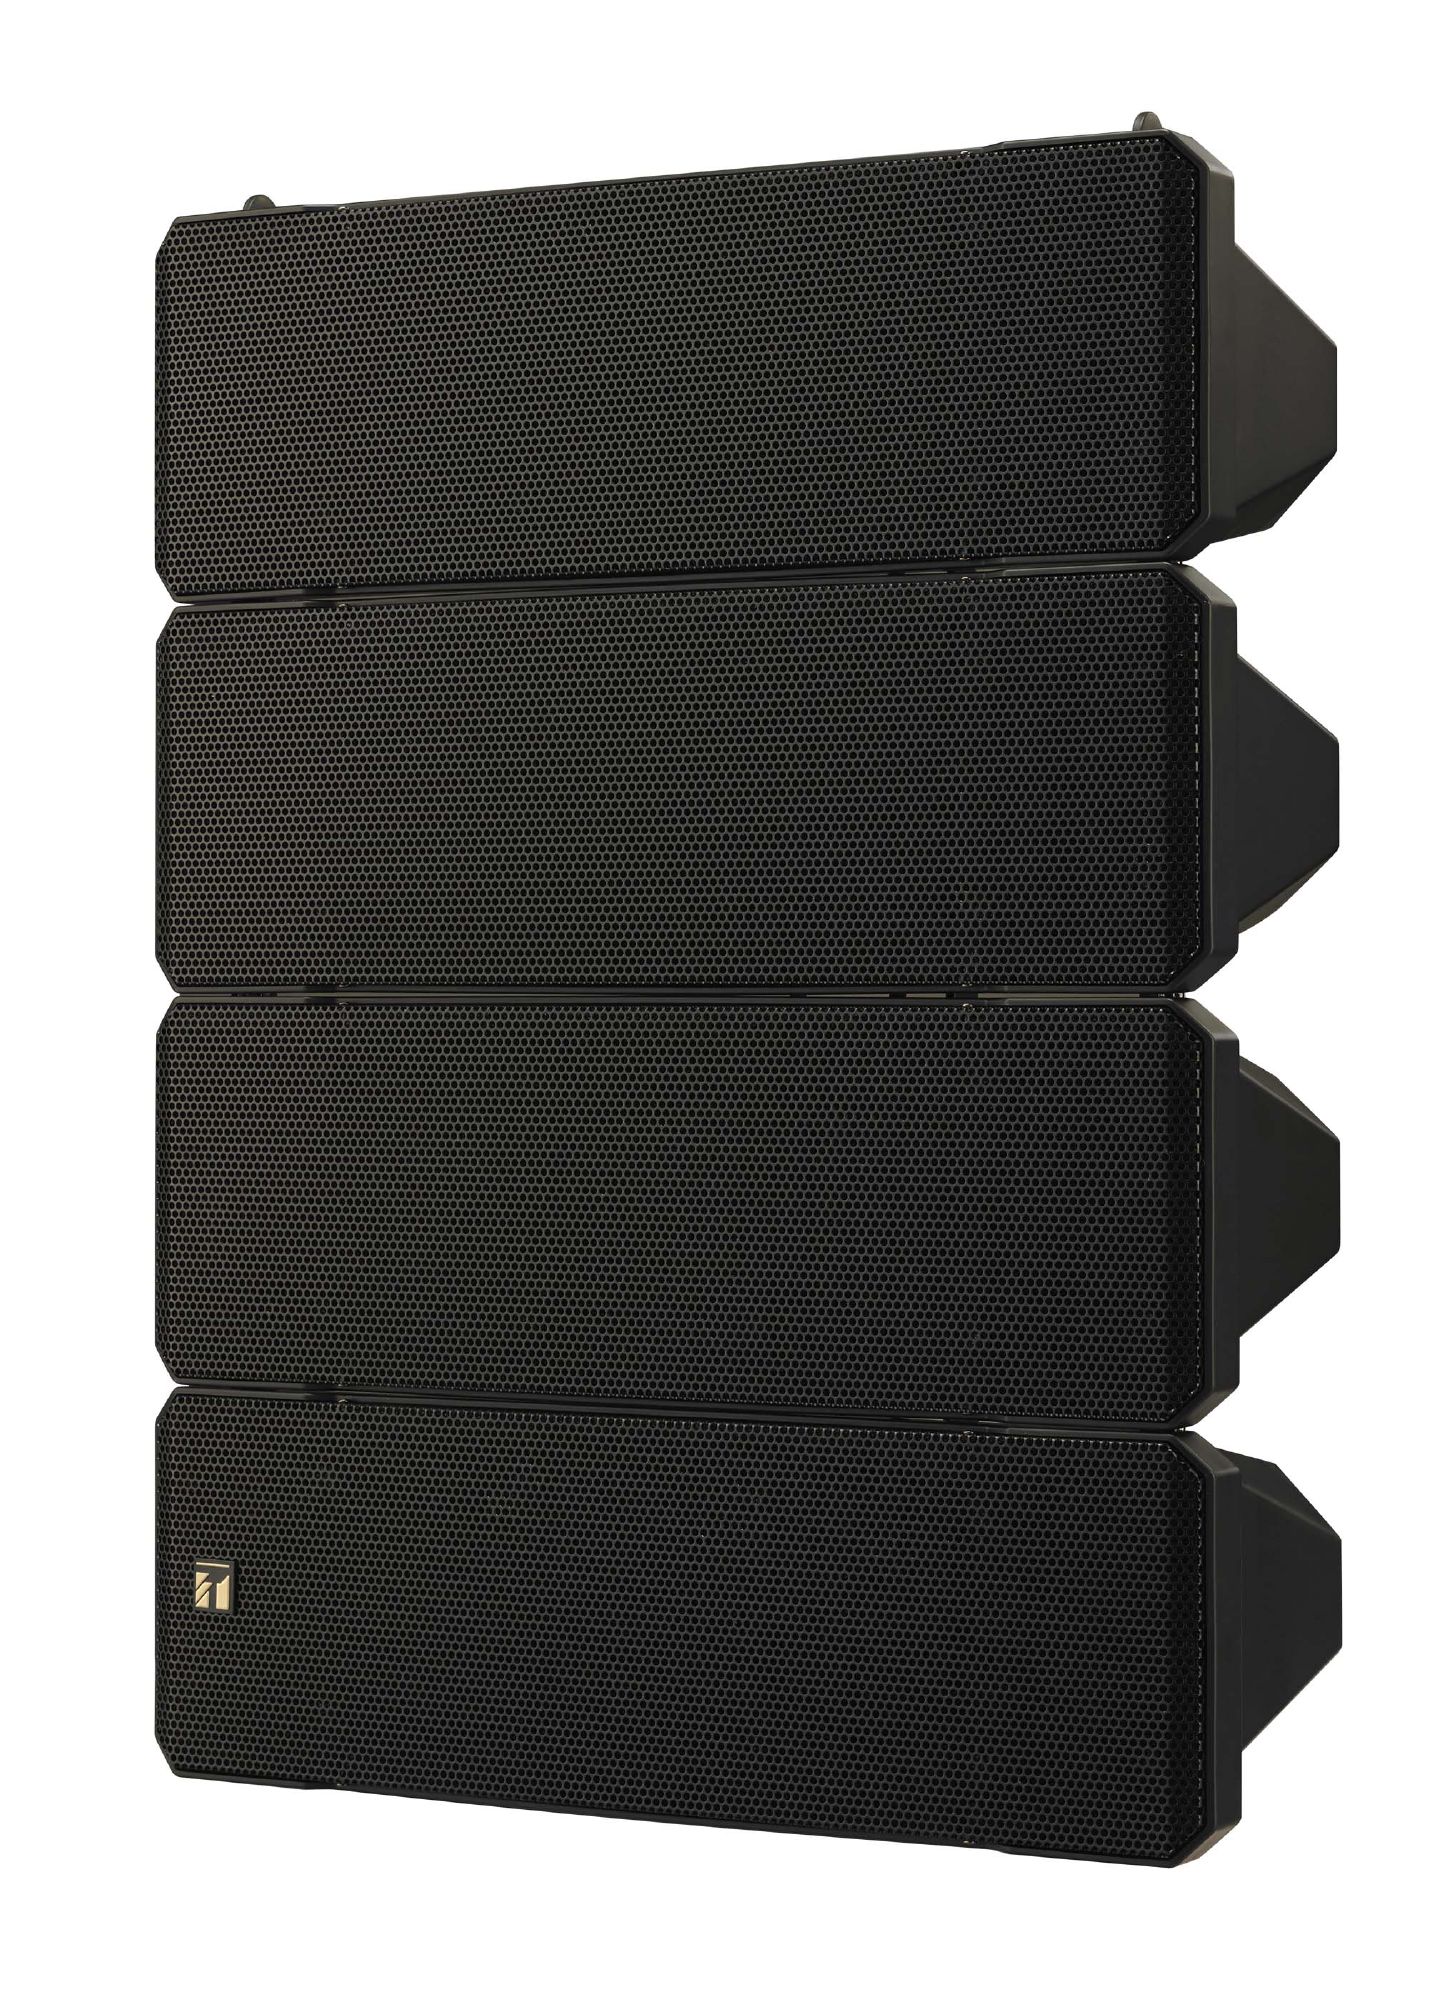 Variable Dispersion Array HX-7